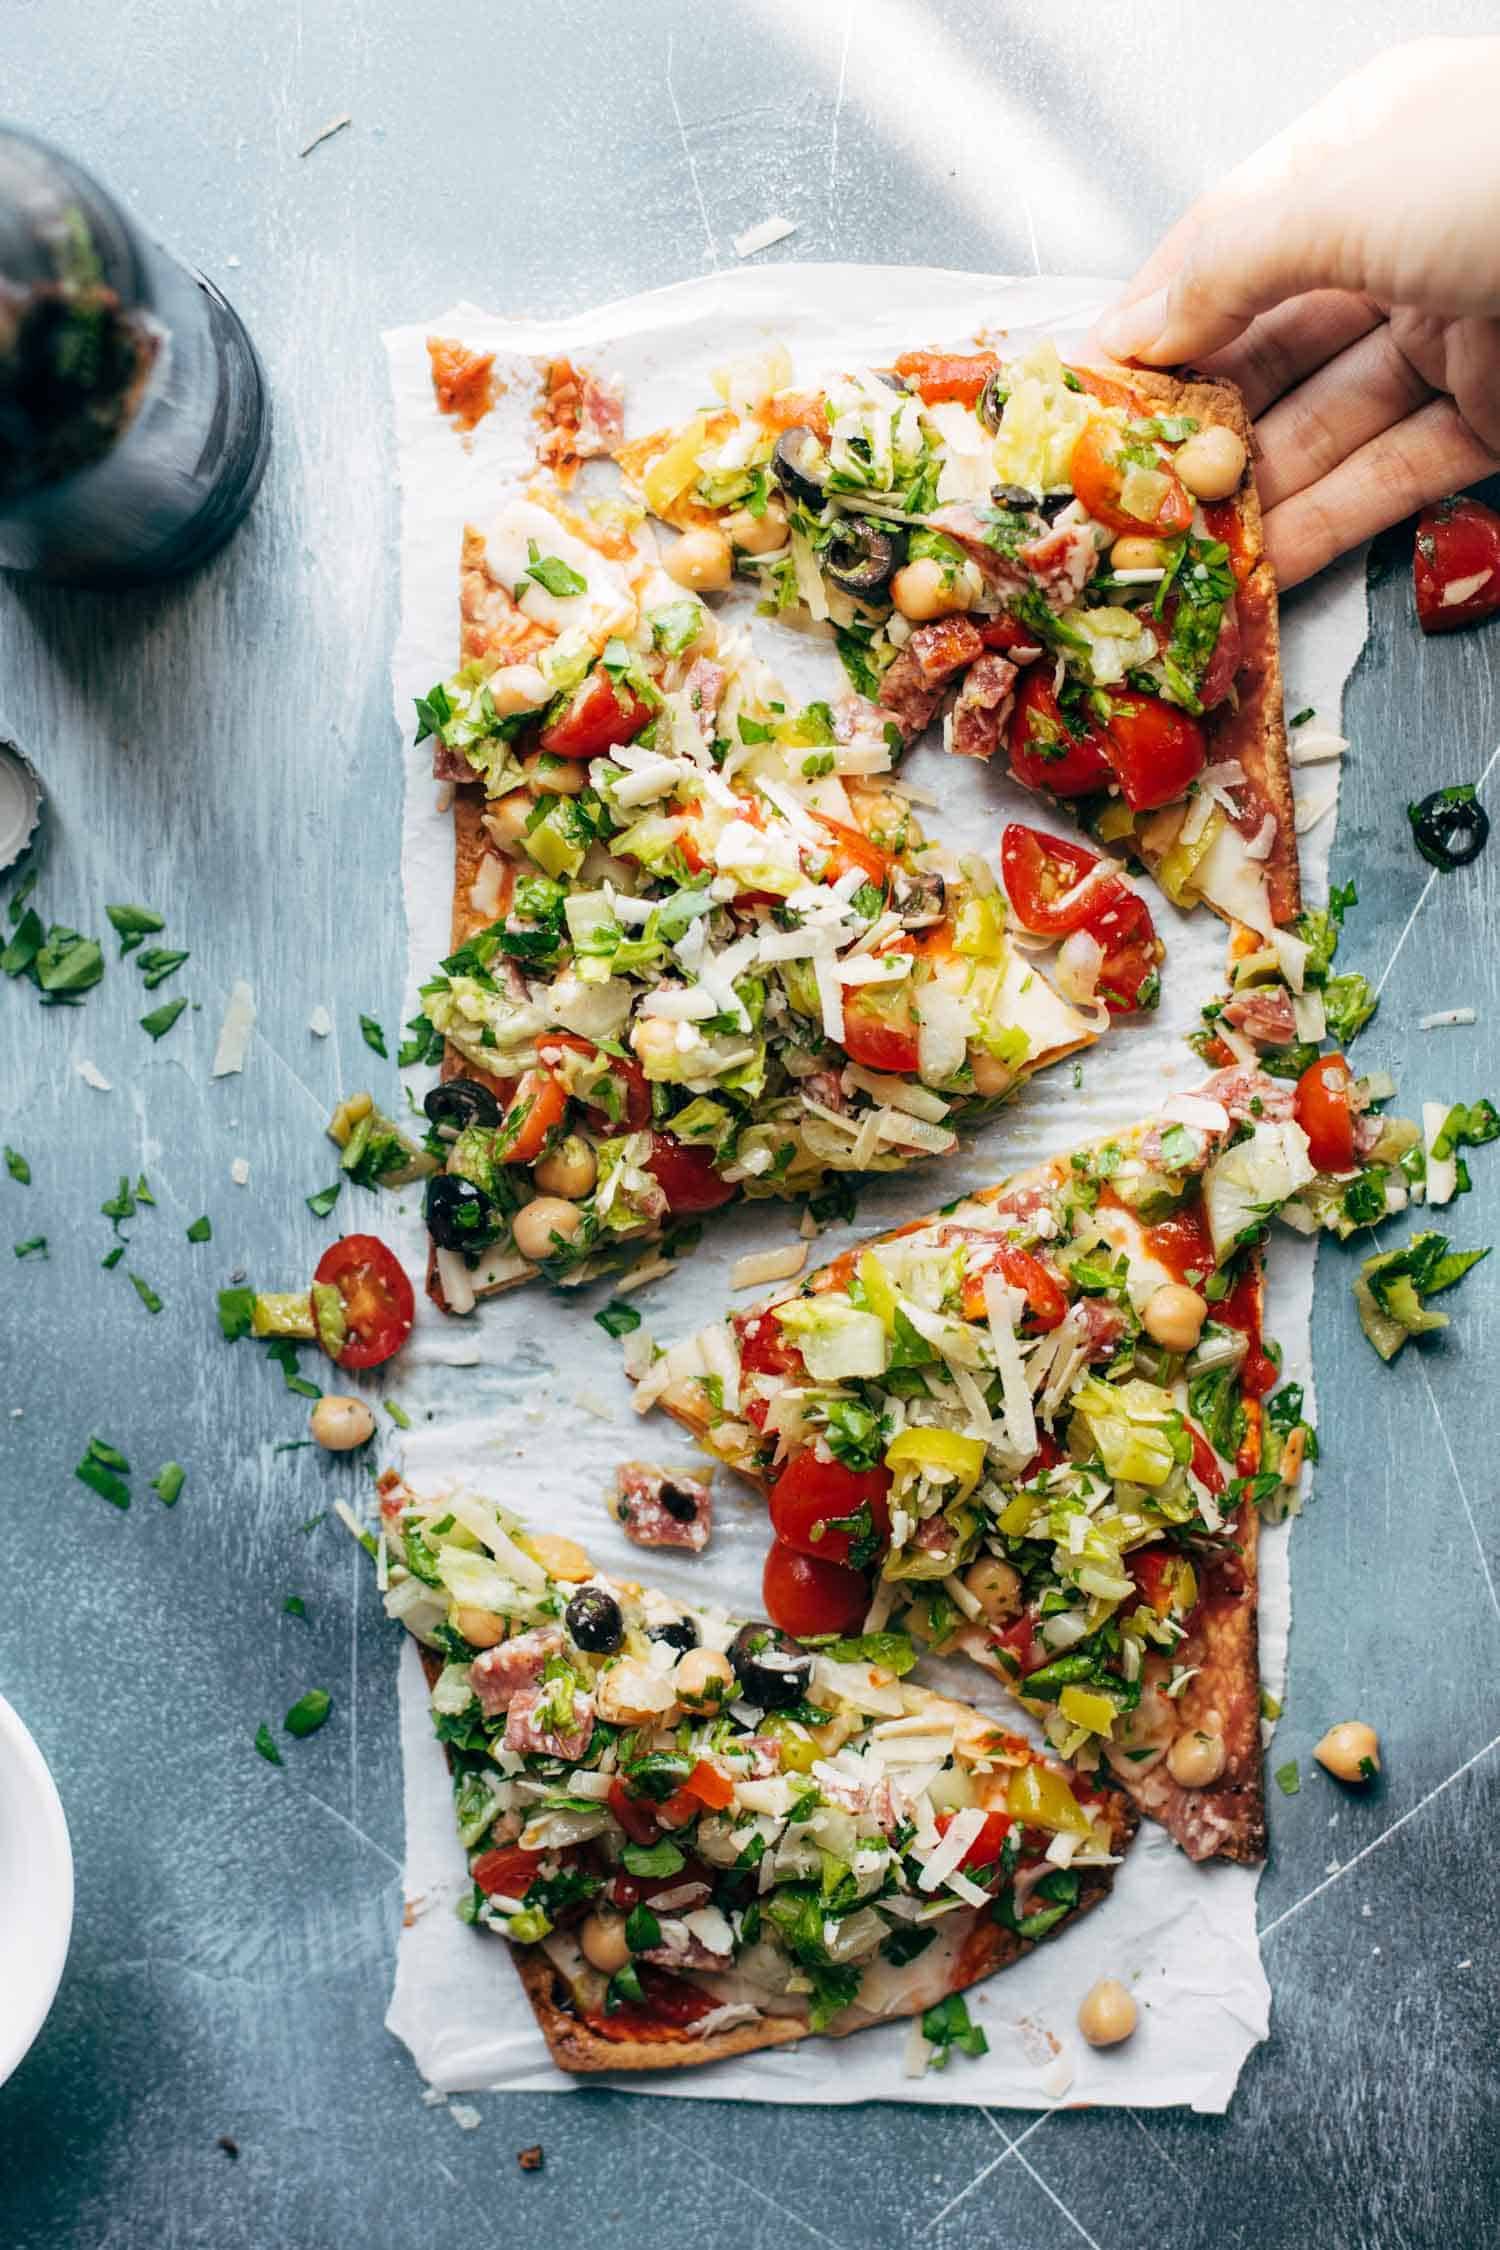 Olives, chickpeas, tomatoes, greens, herbs, and cheese on a thin crust flatbread pizza on a white plate.